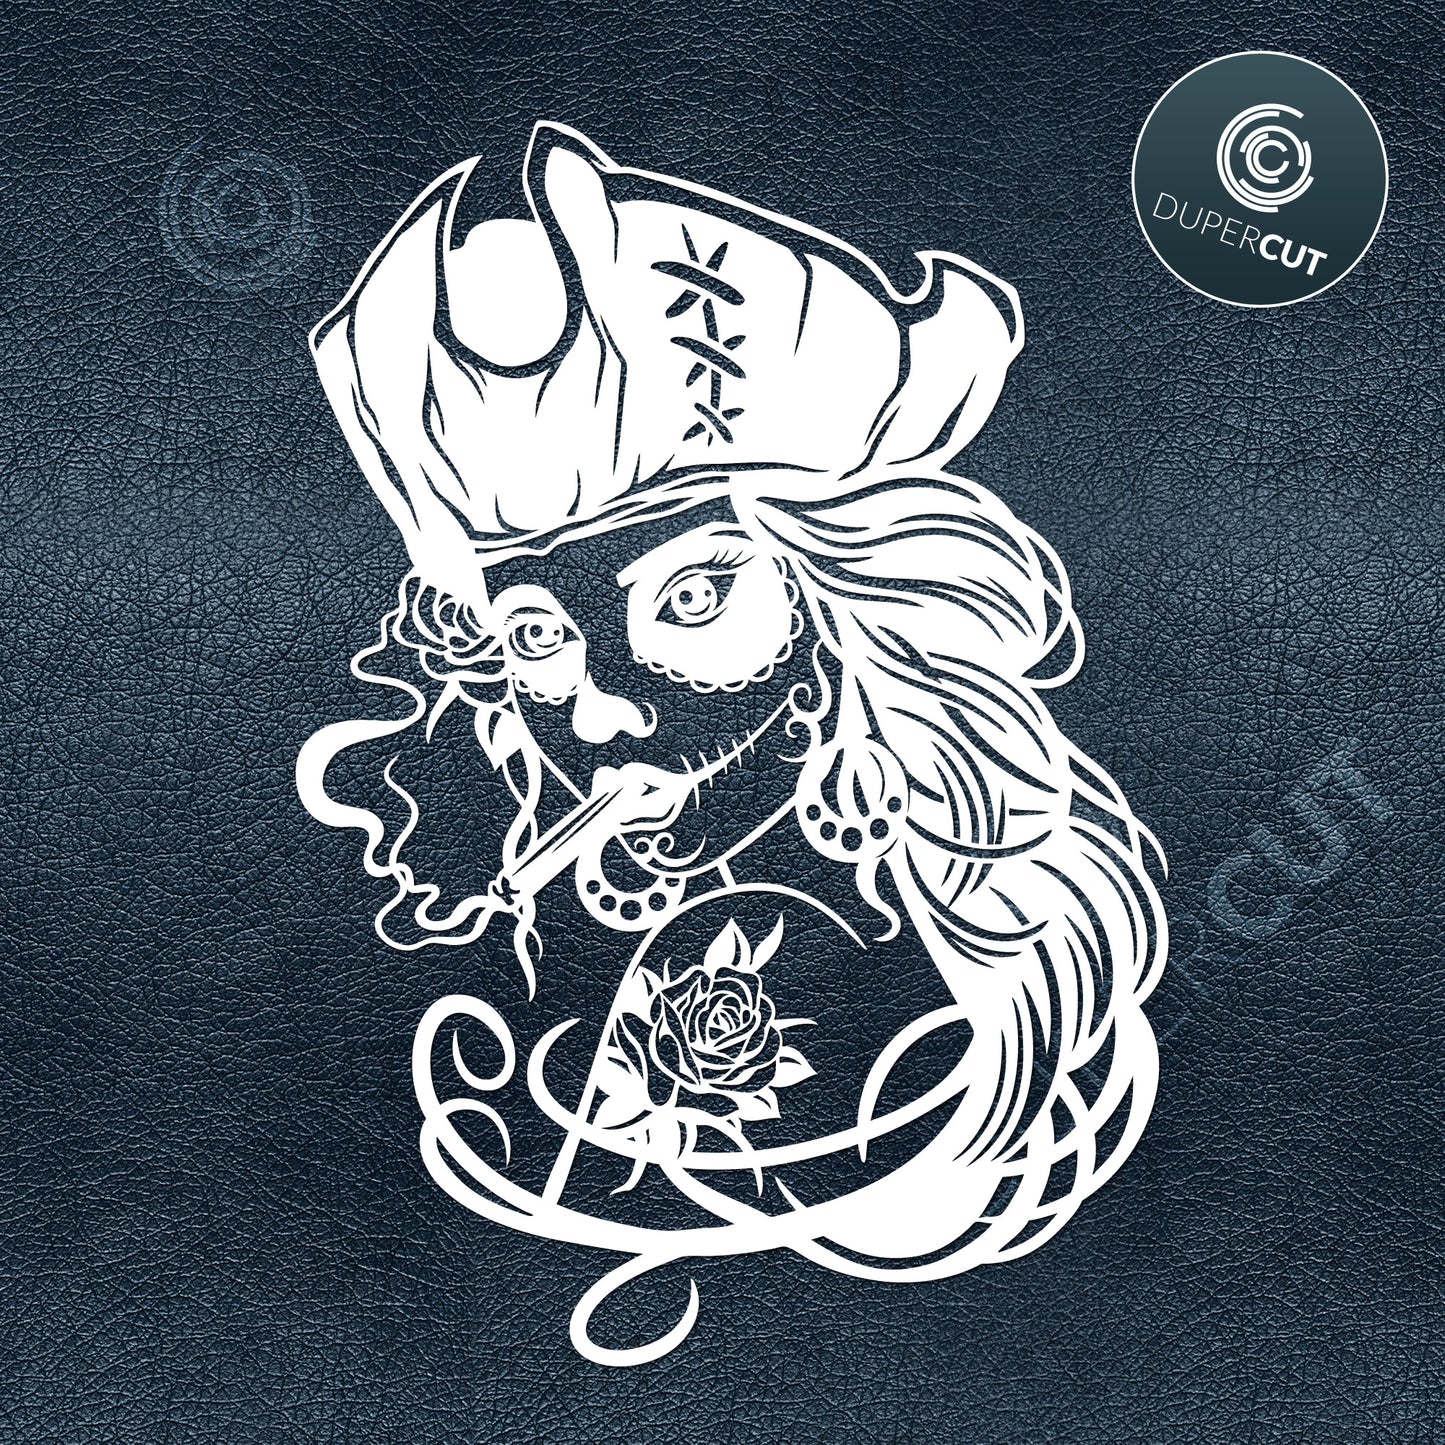 Woman sugar skull in pirate hat with cigar, line drawing template  - SVG DXF JPEG files for CNC machines, laser cutting, Cricut, Silhouette Cameo, Glowforge engraving